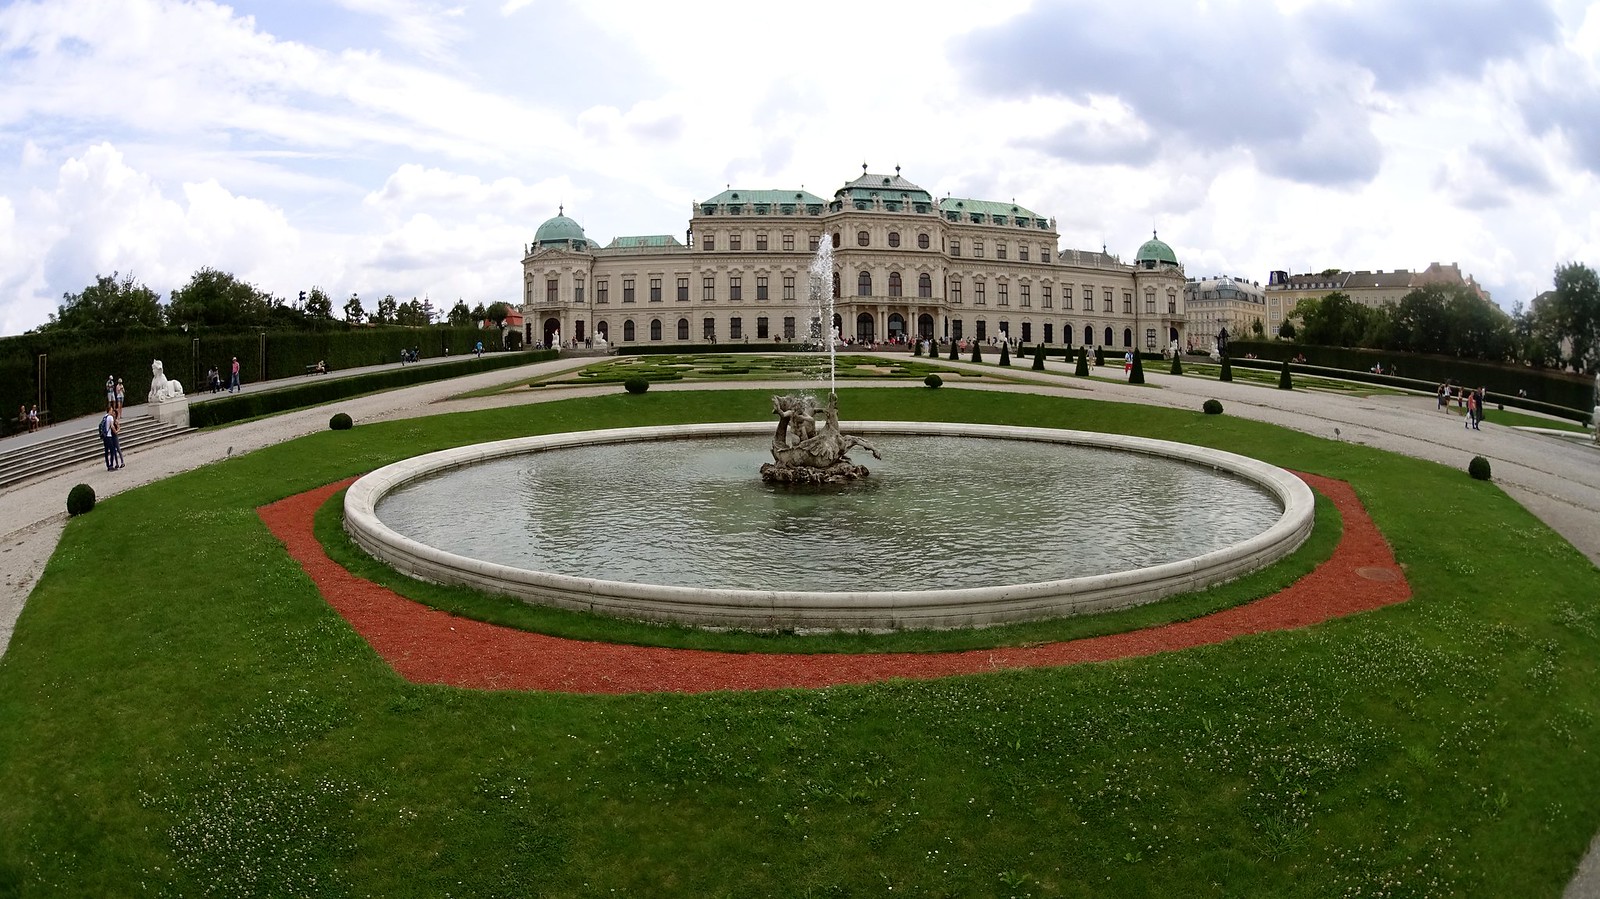 Vienna is one of the most beautiful cities we’ve visited so far, but it is by far on the top 5 most expensive cities to be. After spending 4 days in Vienna last summer, I came up with this marvelous list of free things to do in Vienna. And let’s be honest, in a city where a museum can easily costs more than 25€, you will need this post, huh?  Before continuing with the post, I have to say that, even thought Vienna is very expensive, it is one of the safest cities we’ve been. When we roamed around through the endless streets full of beautiful architecture and art, we realized that Vienna was a safer and slightly more expensive version of Paris.